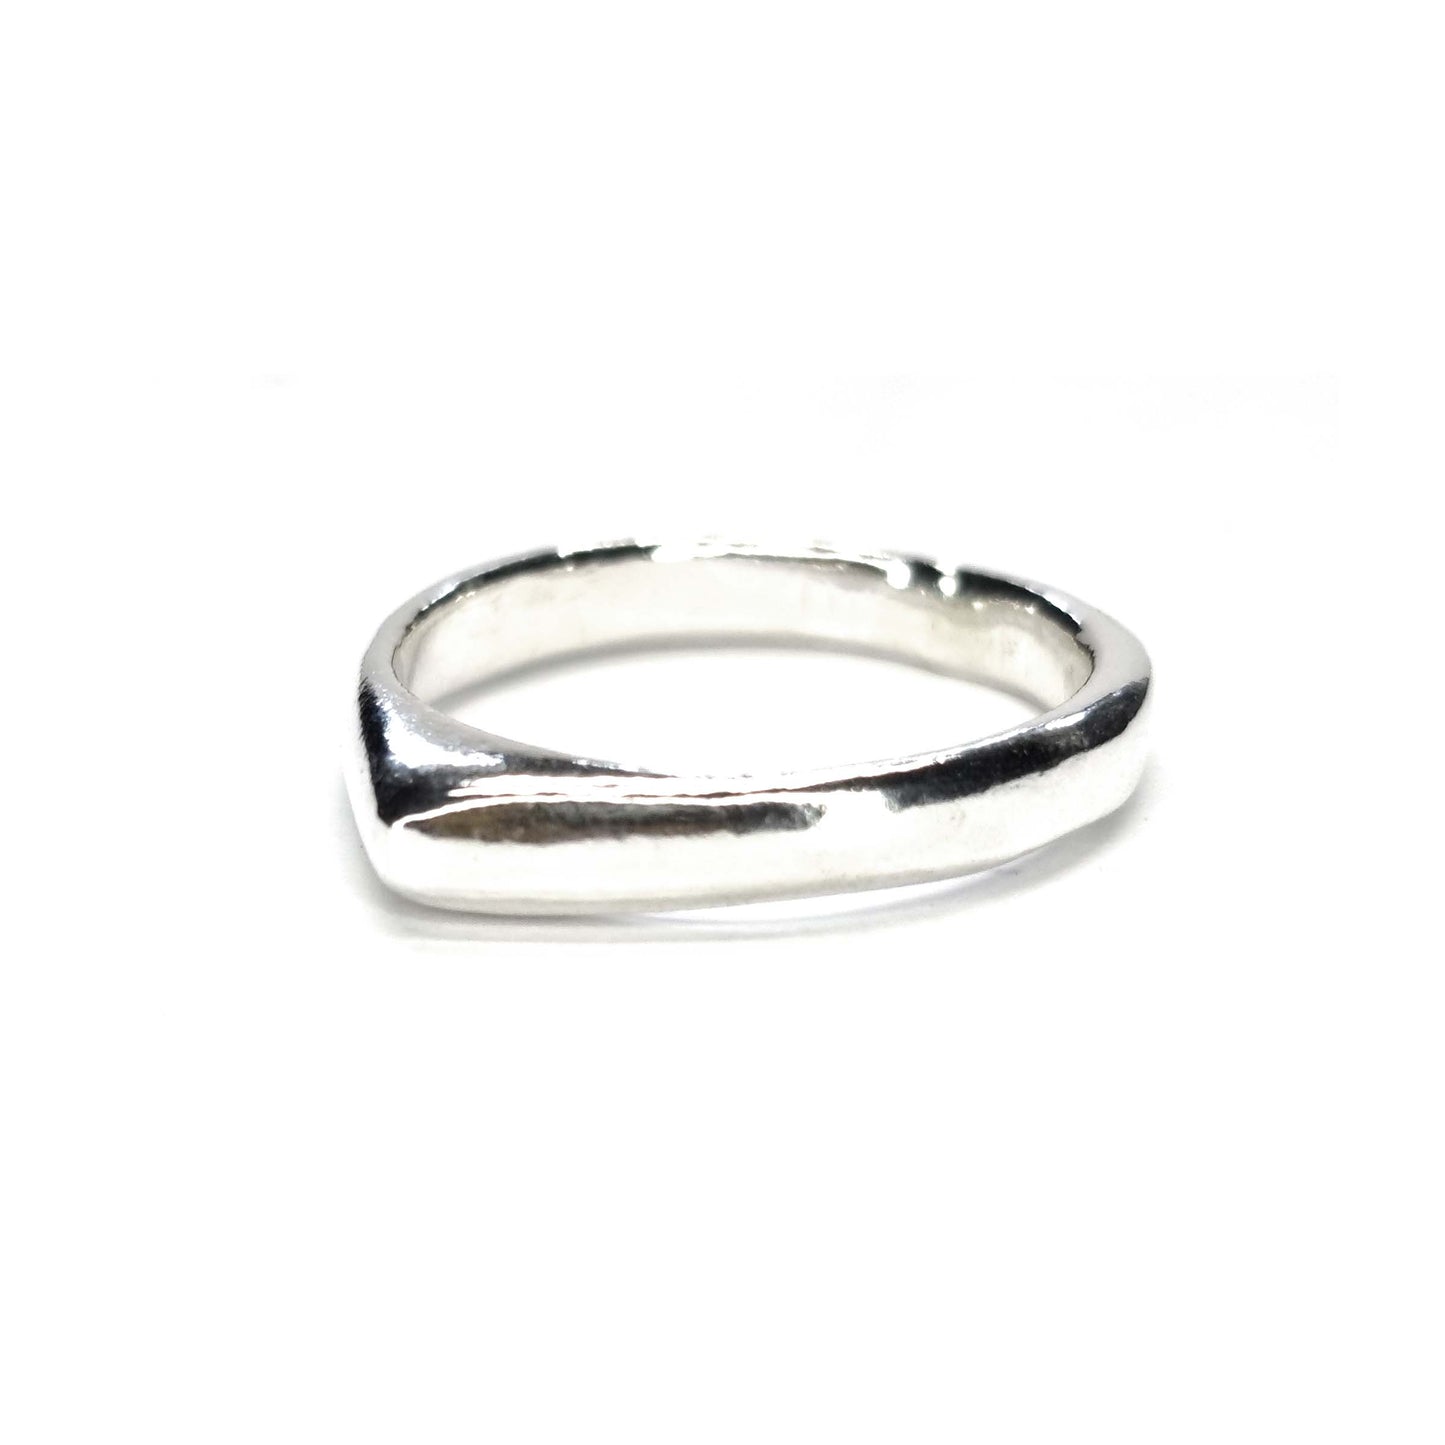 A silver ring which comes to a soft point at the top.